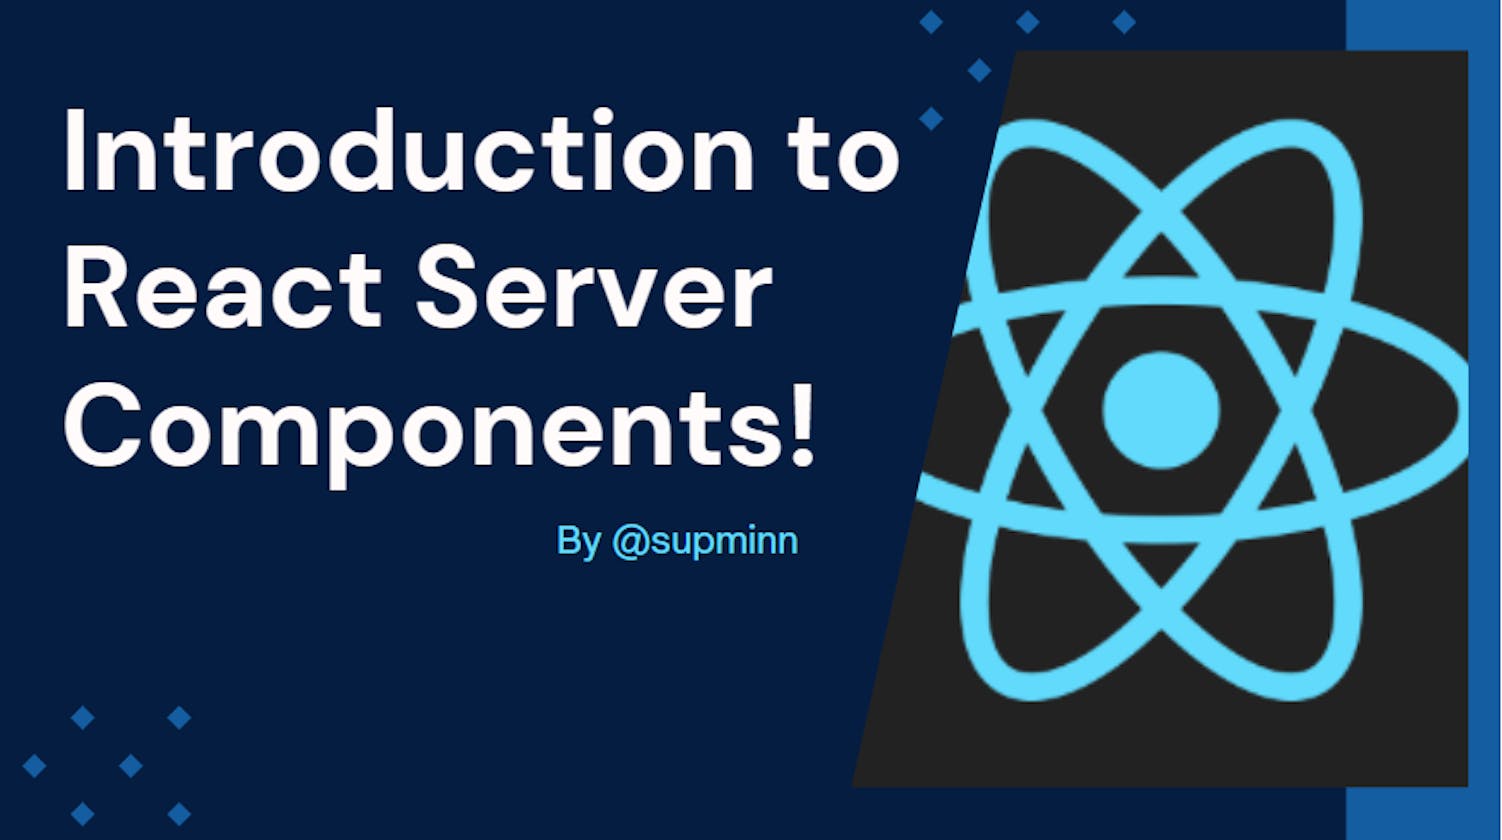 Introduction to React Server Components!